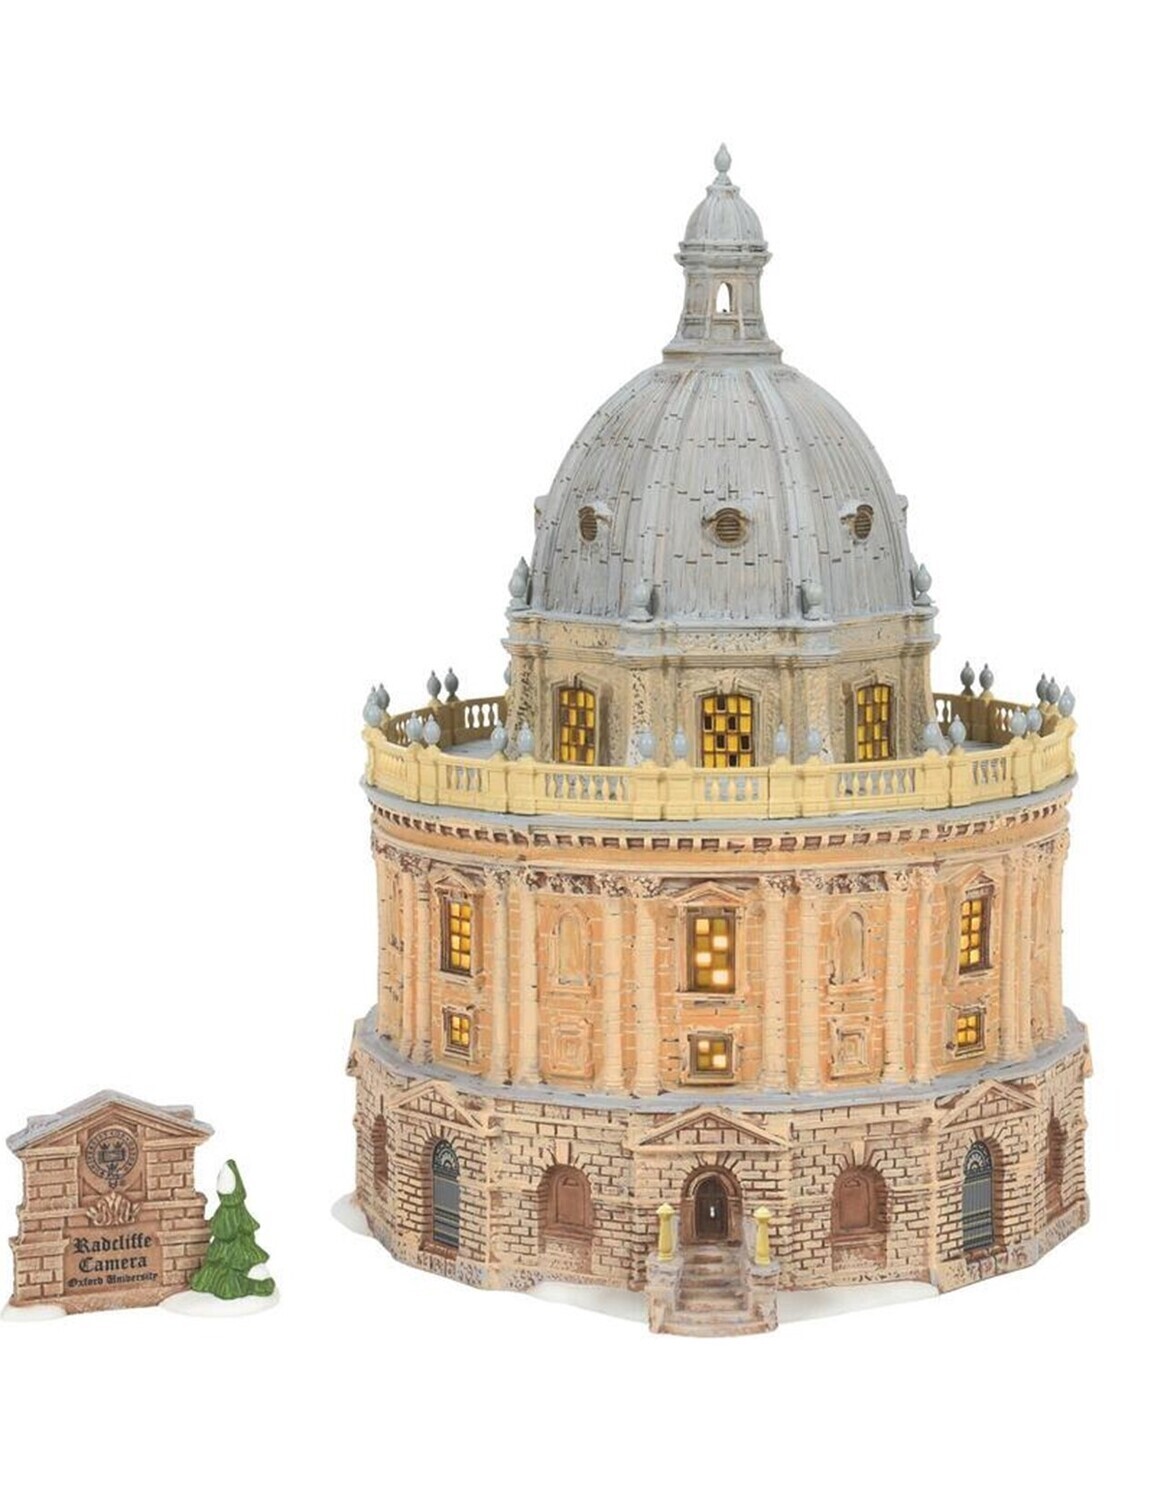 Department 56 Dickens Village "Oxford's Radcliffe Camera" Light Up Building (6005397)